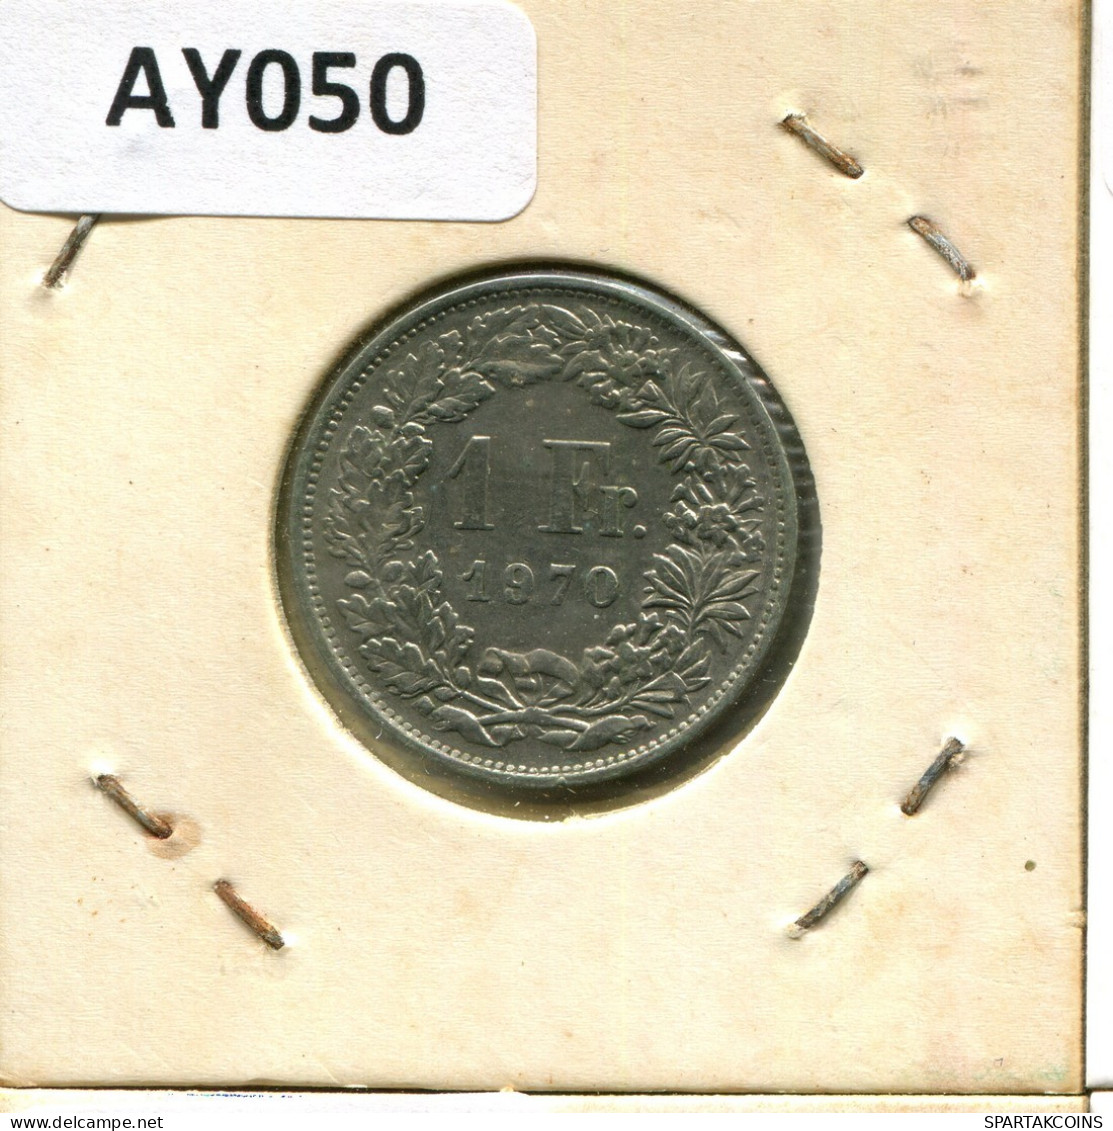 1 FRANC 1970 SUIZA SWITZERLAND Moneda #AY050.3.E.A - Other & Unclassified